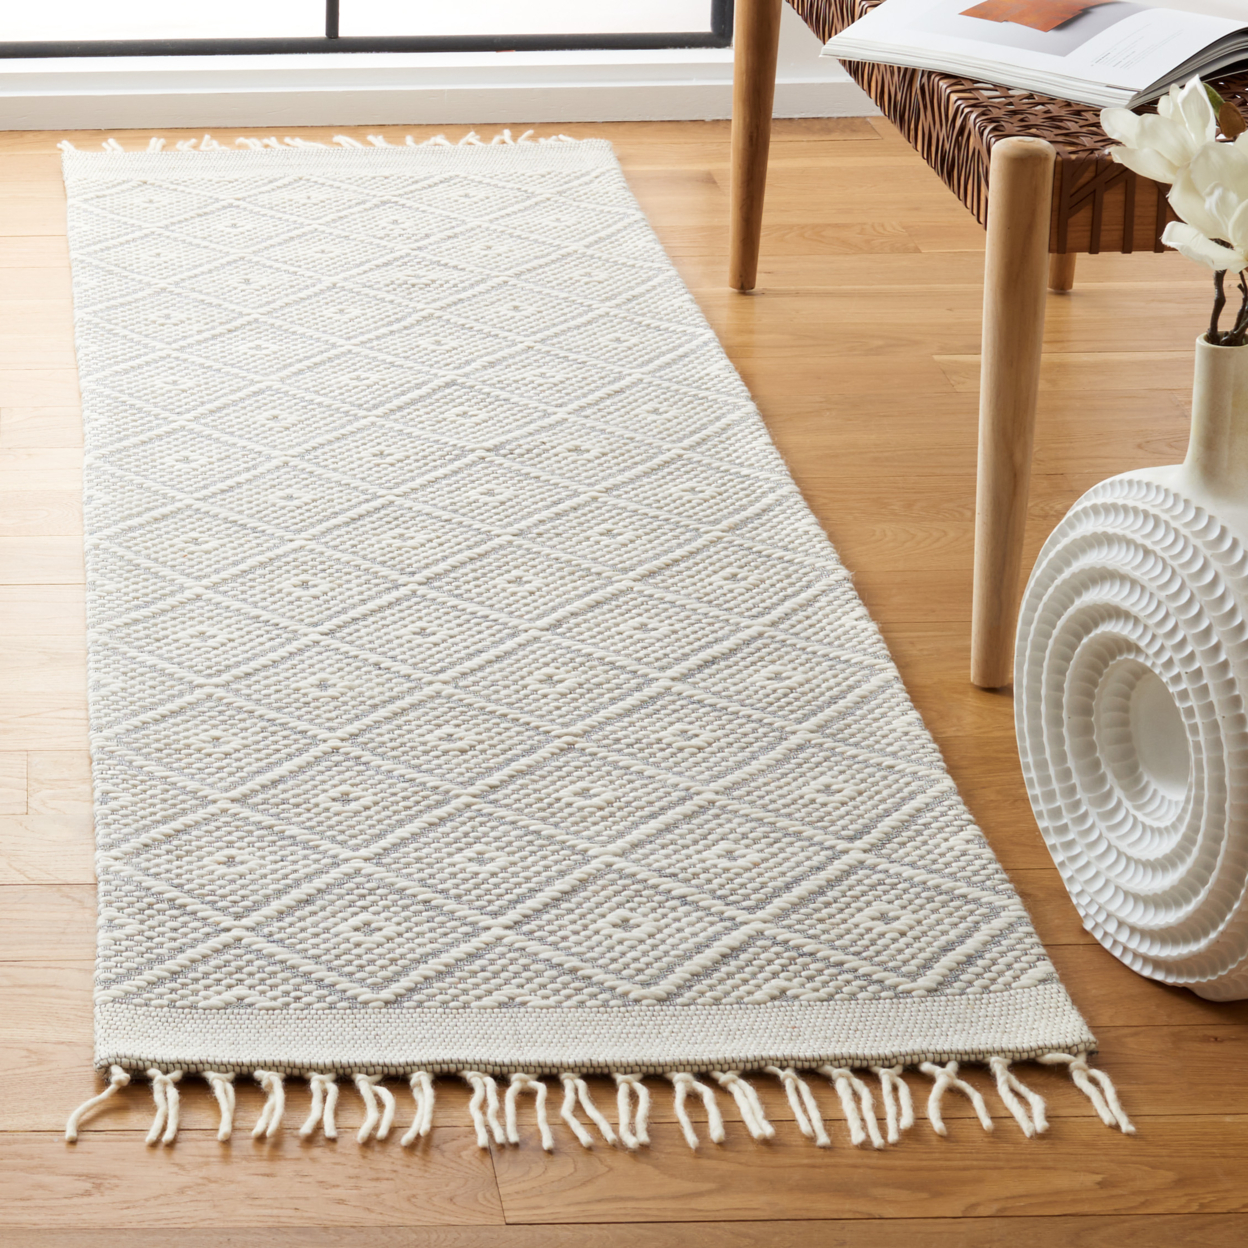 SAFAVIEH Vermont Collection VRM311A Handmade Ivory Rug - 6' Square